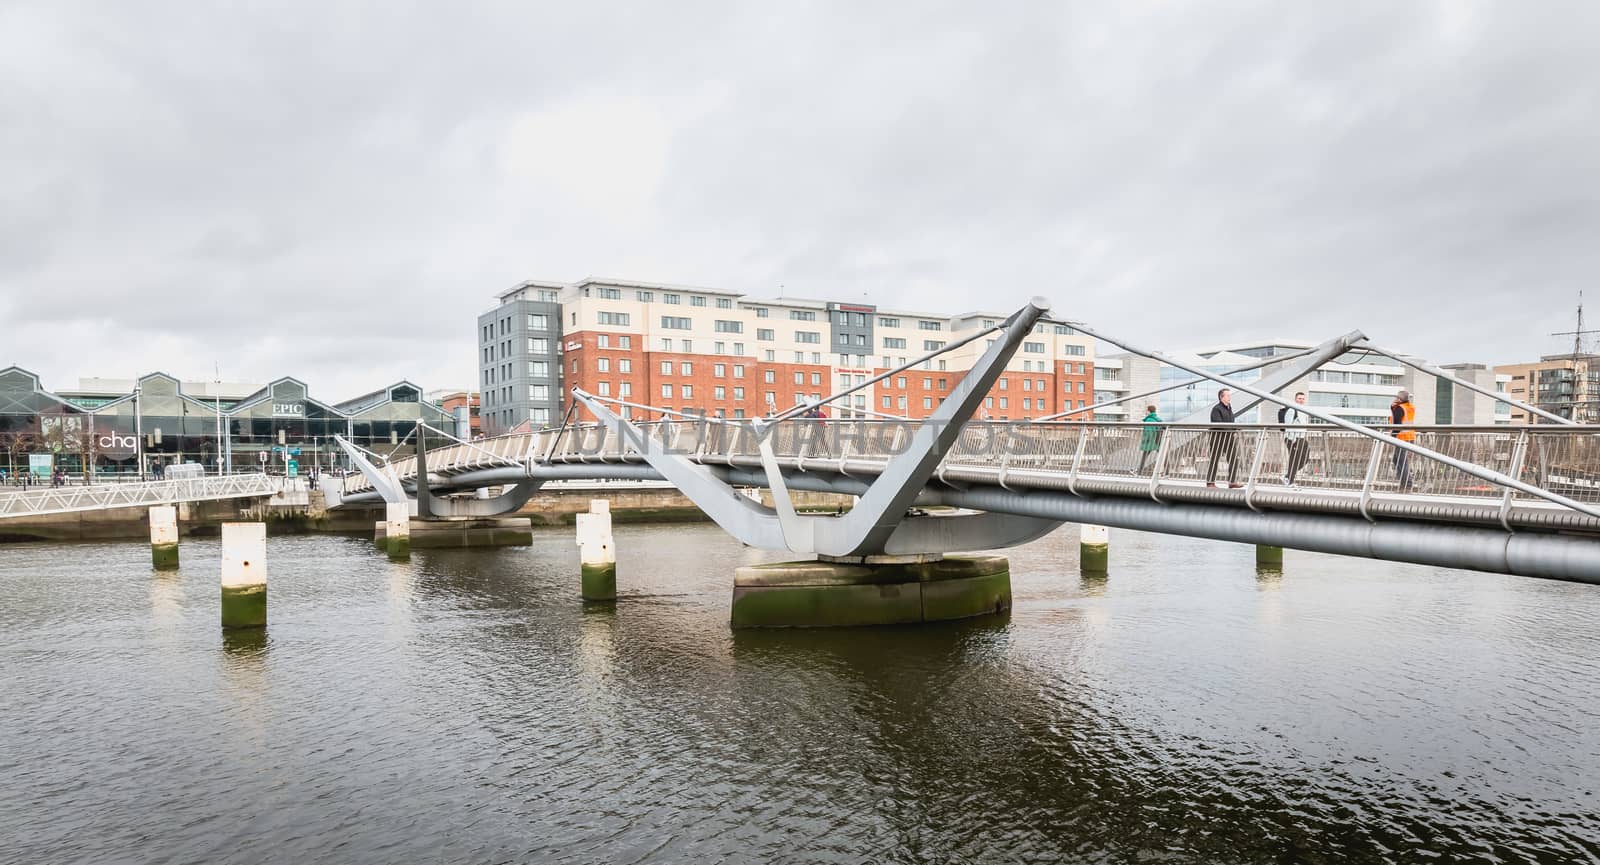 Dublin, Ireland - February 12, 2019: mix of modern and old architecture along the Liffey River in the city center on a winter day